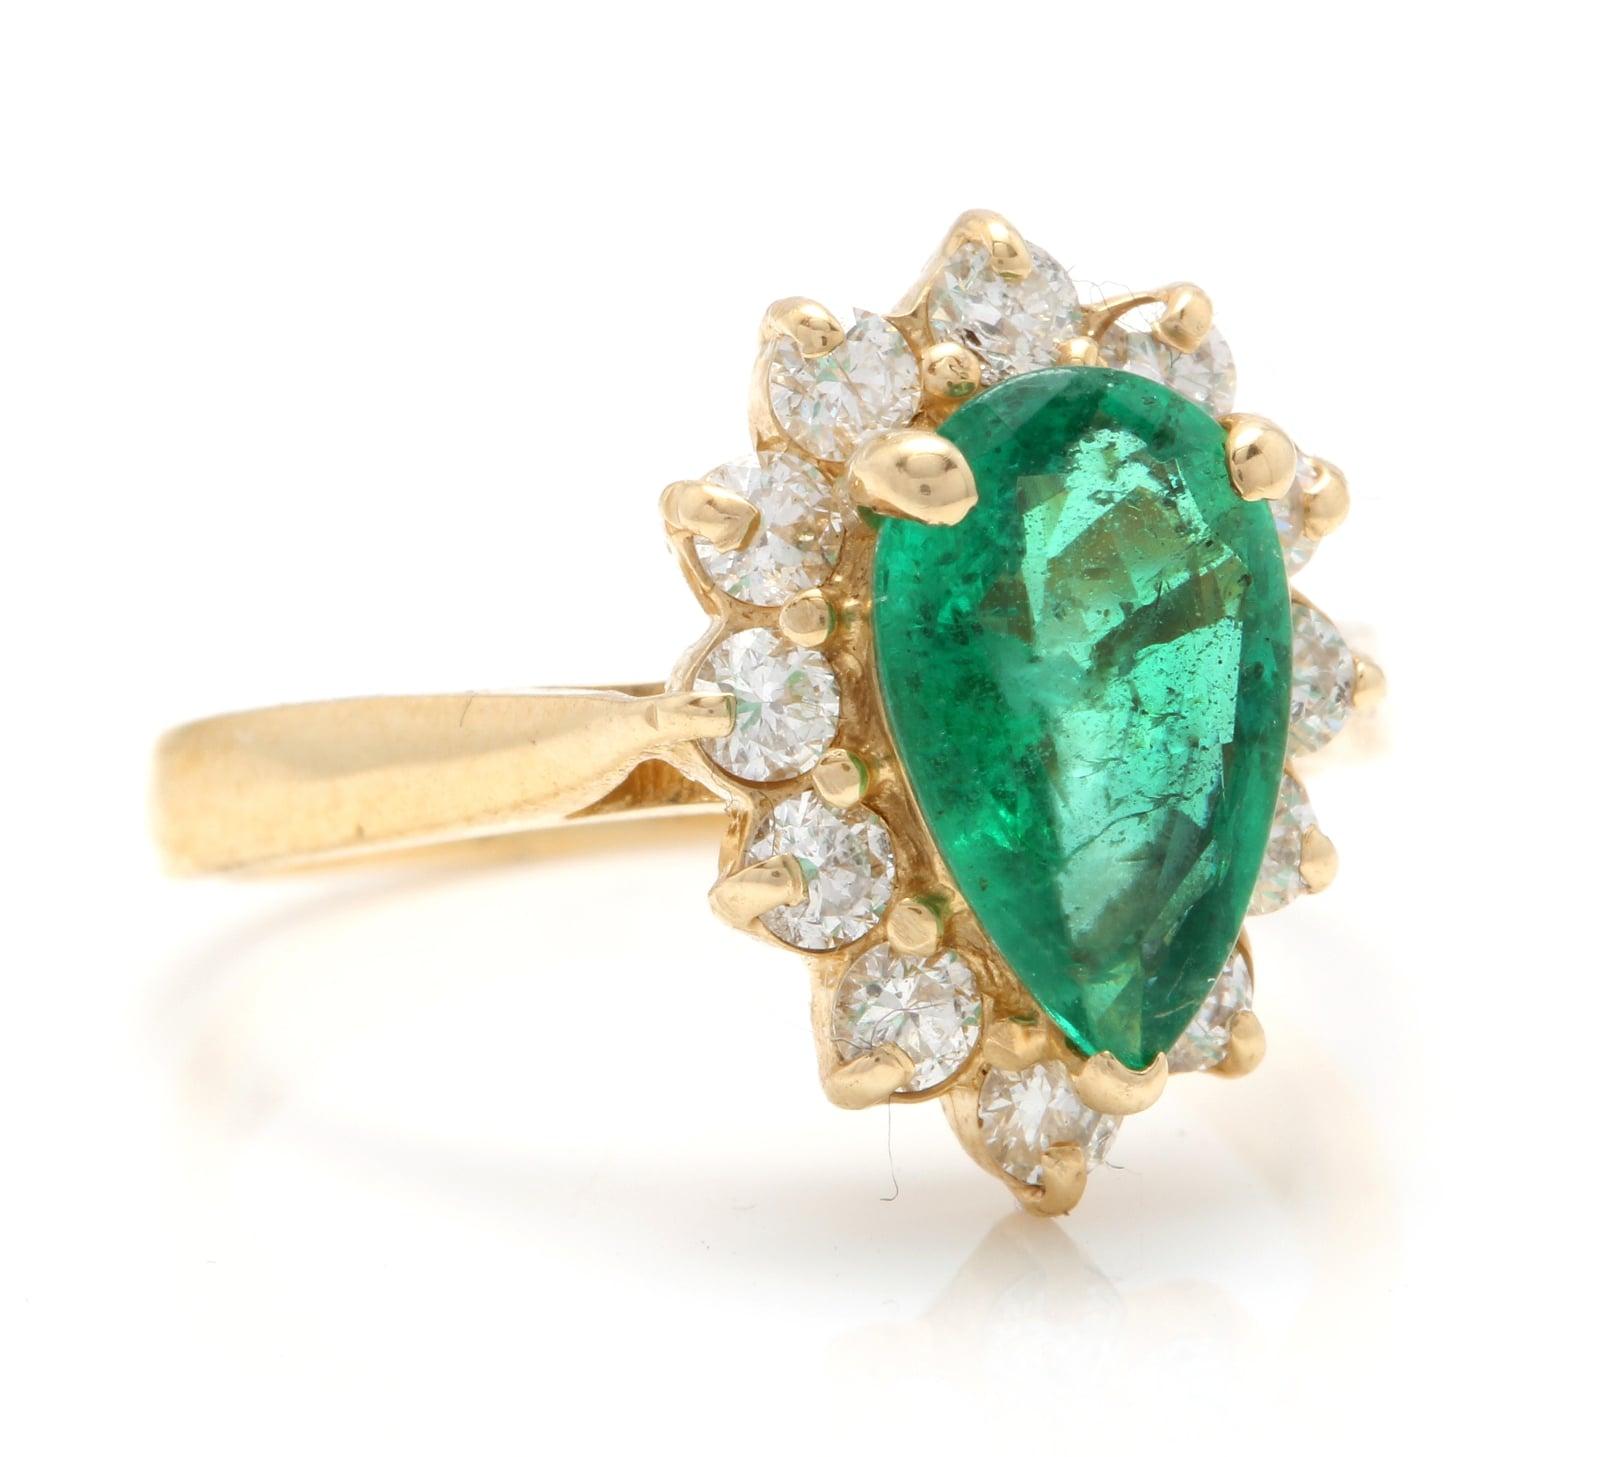 3.05 Carats Natural Emerald and Diamond 14K Solid Yellow Gold Ring

Total Natural Green Emerald Weight is: 2.40 Carats (transparent)

Emerald Measures: Approx. 10.00 x 7.00mm

Natural Round Diamonds Weight: .65 Carats (color G-H / Clarity